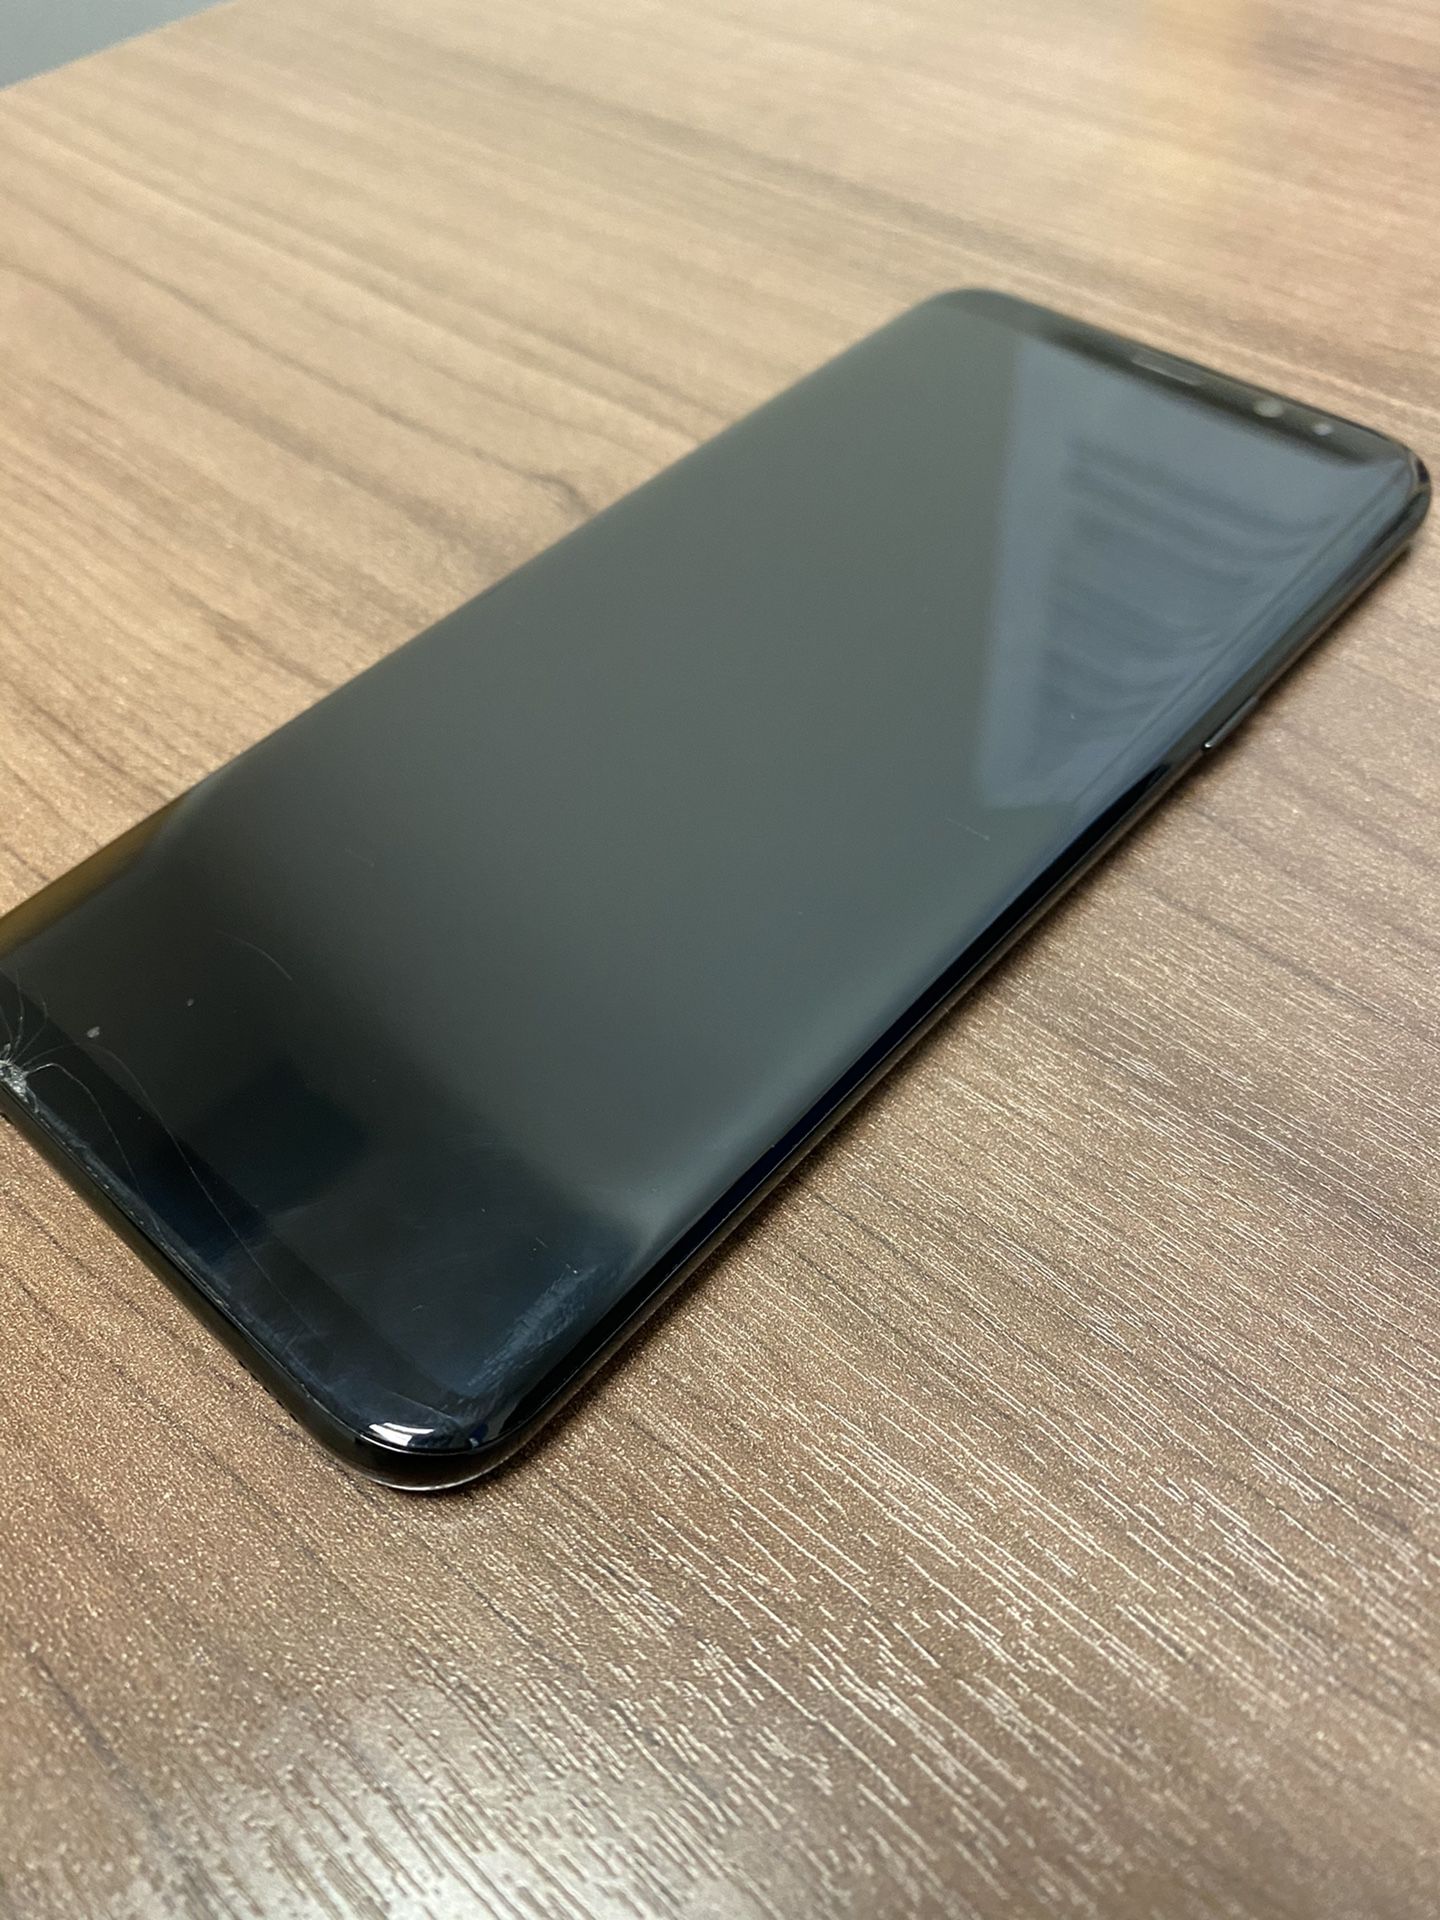 Samsung S8 Plus (with charger)